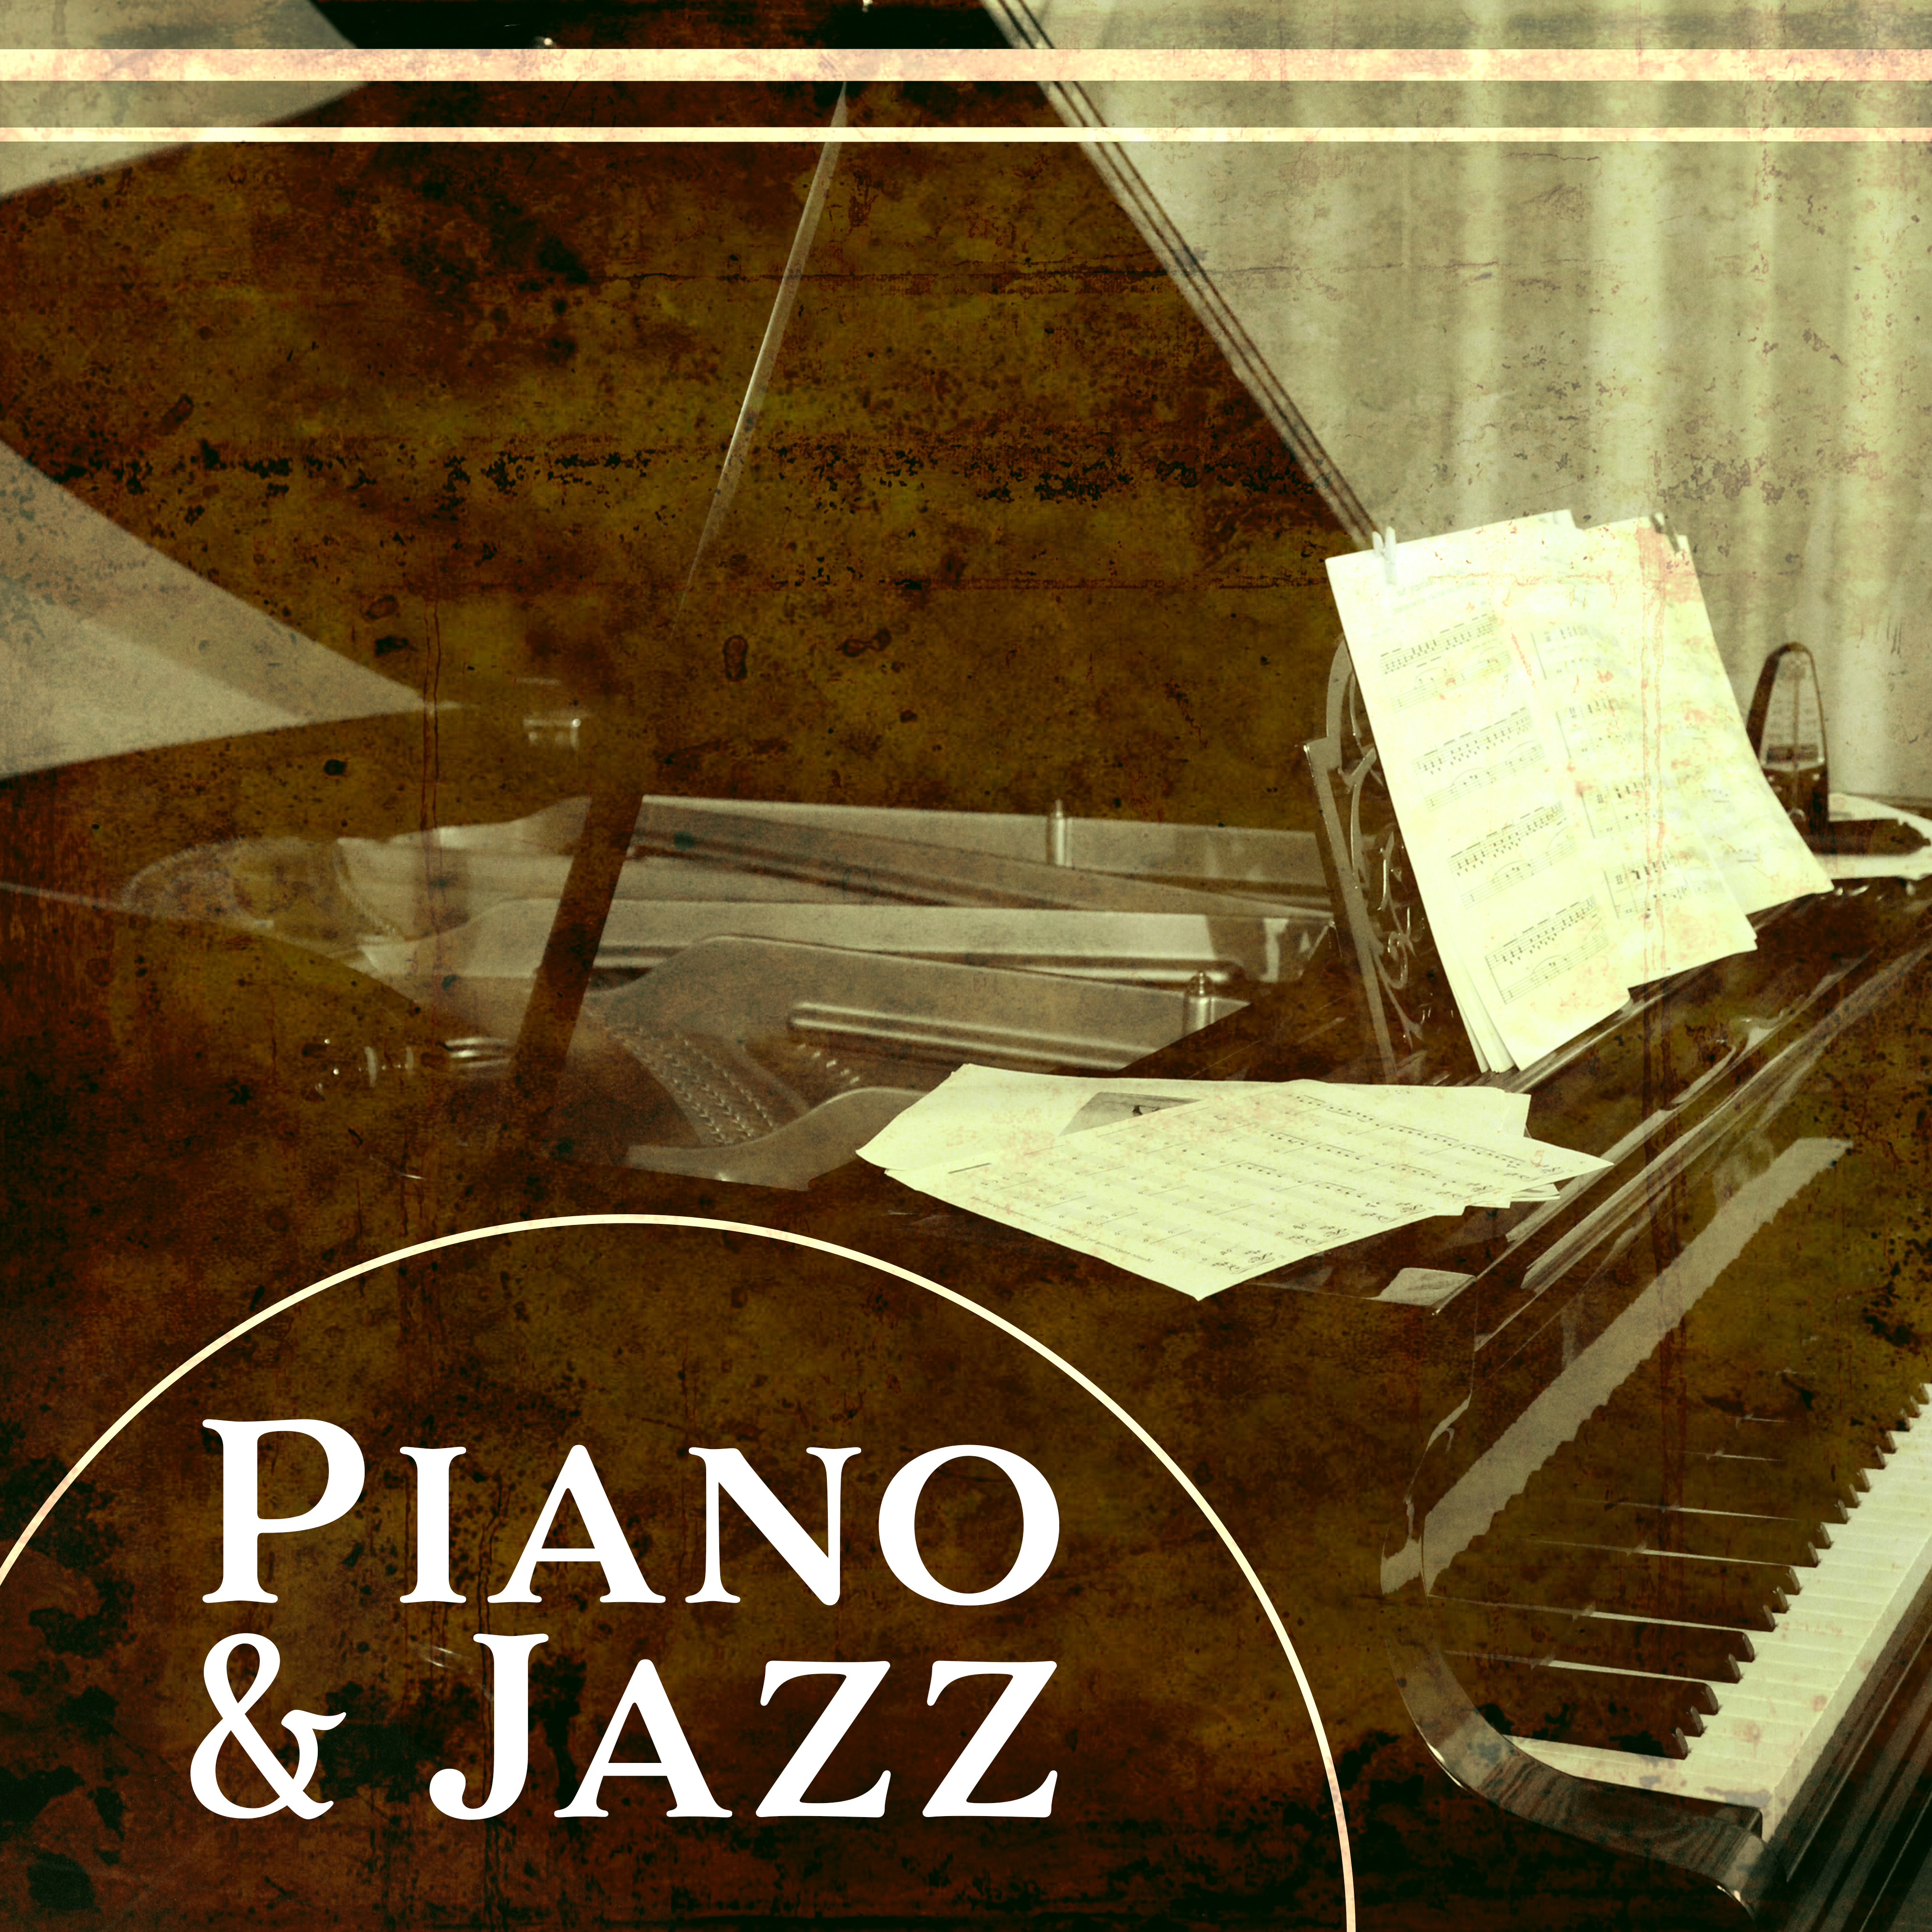 Piano  Jazz  Best Smooth Jazz for Relaxation, Jazz Cafe, Restaurant Music, Ambient Lounge, Meeting with Family, Mellow Jazz